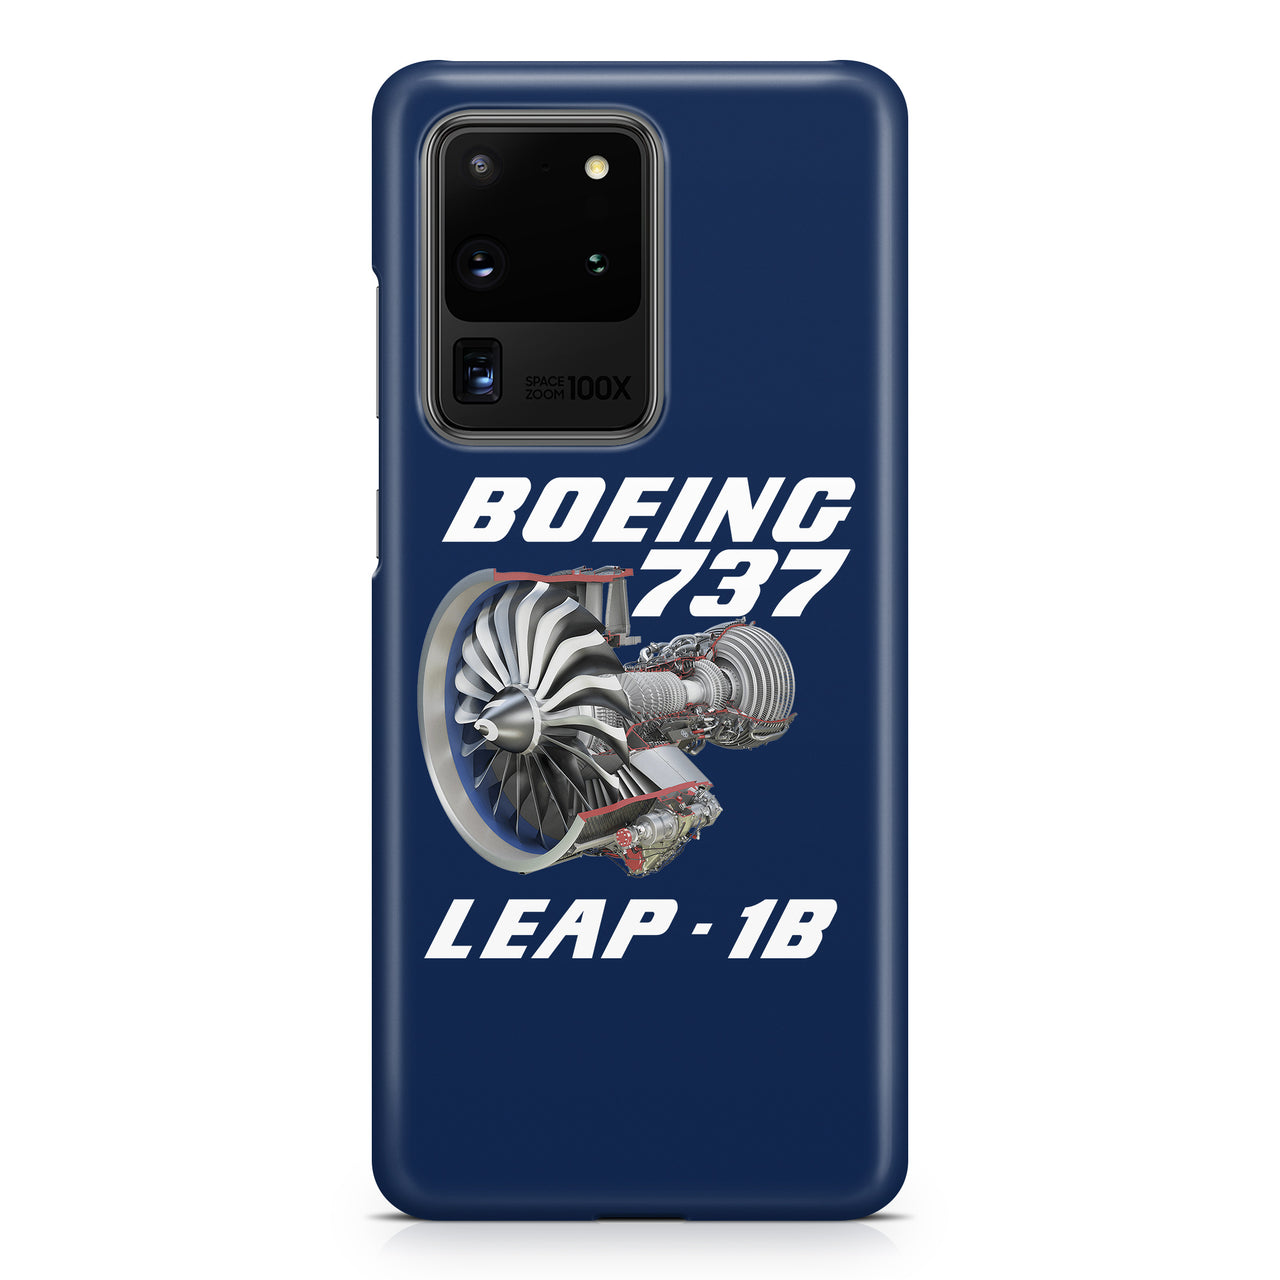 Boeing 737 & Leap 1B Samsung A Cases